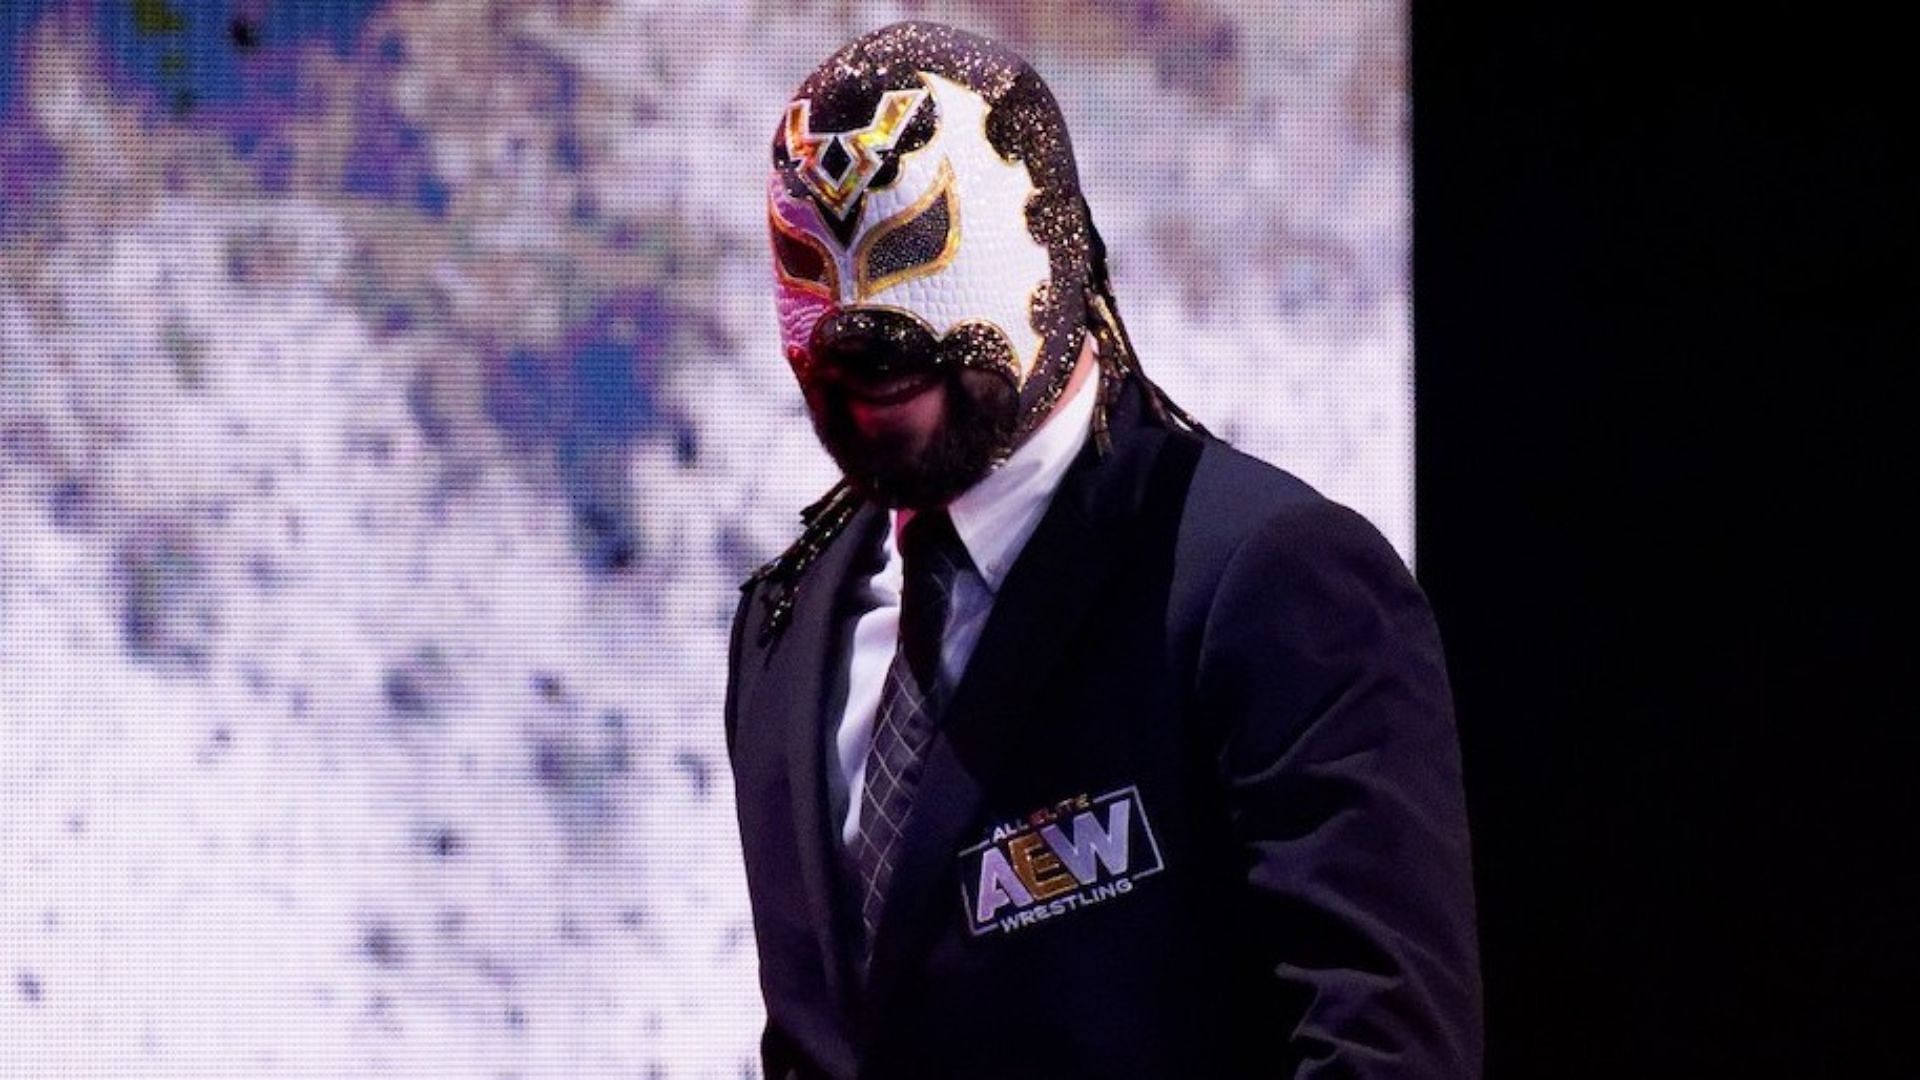 Excalibur is a member of AEW